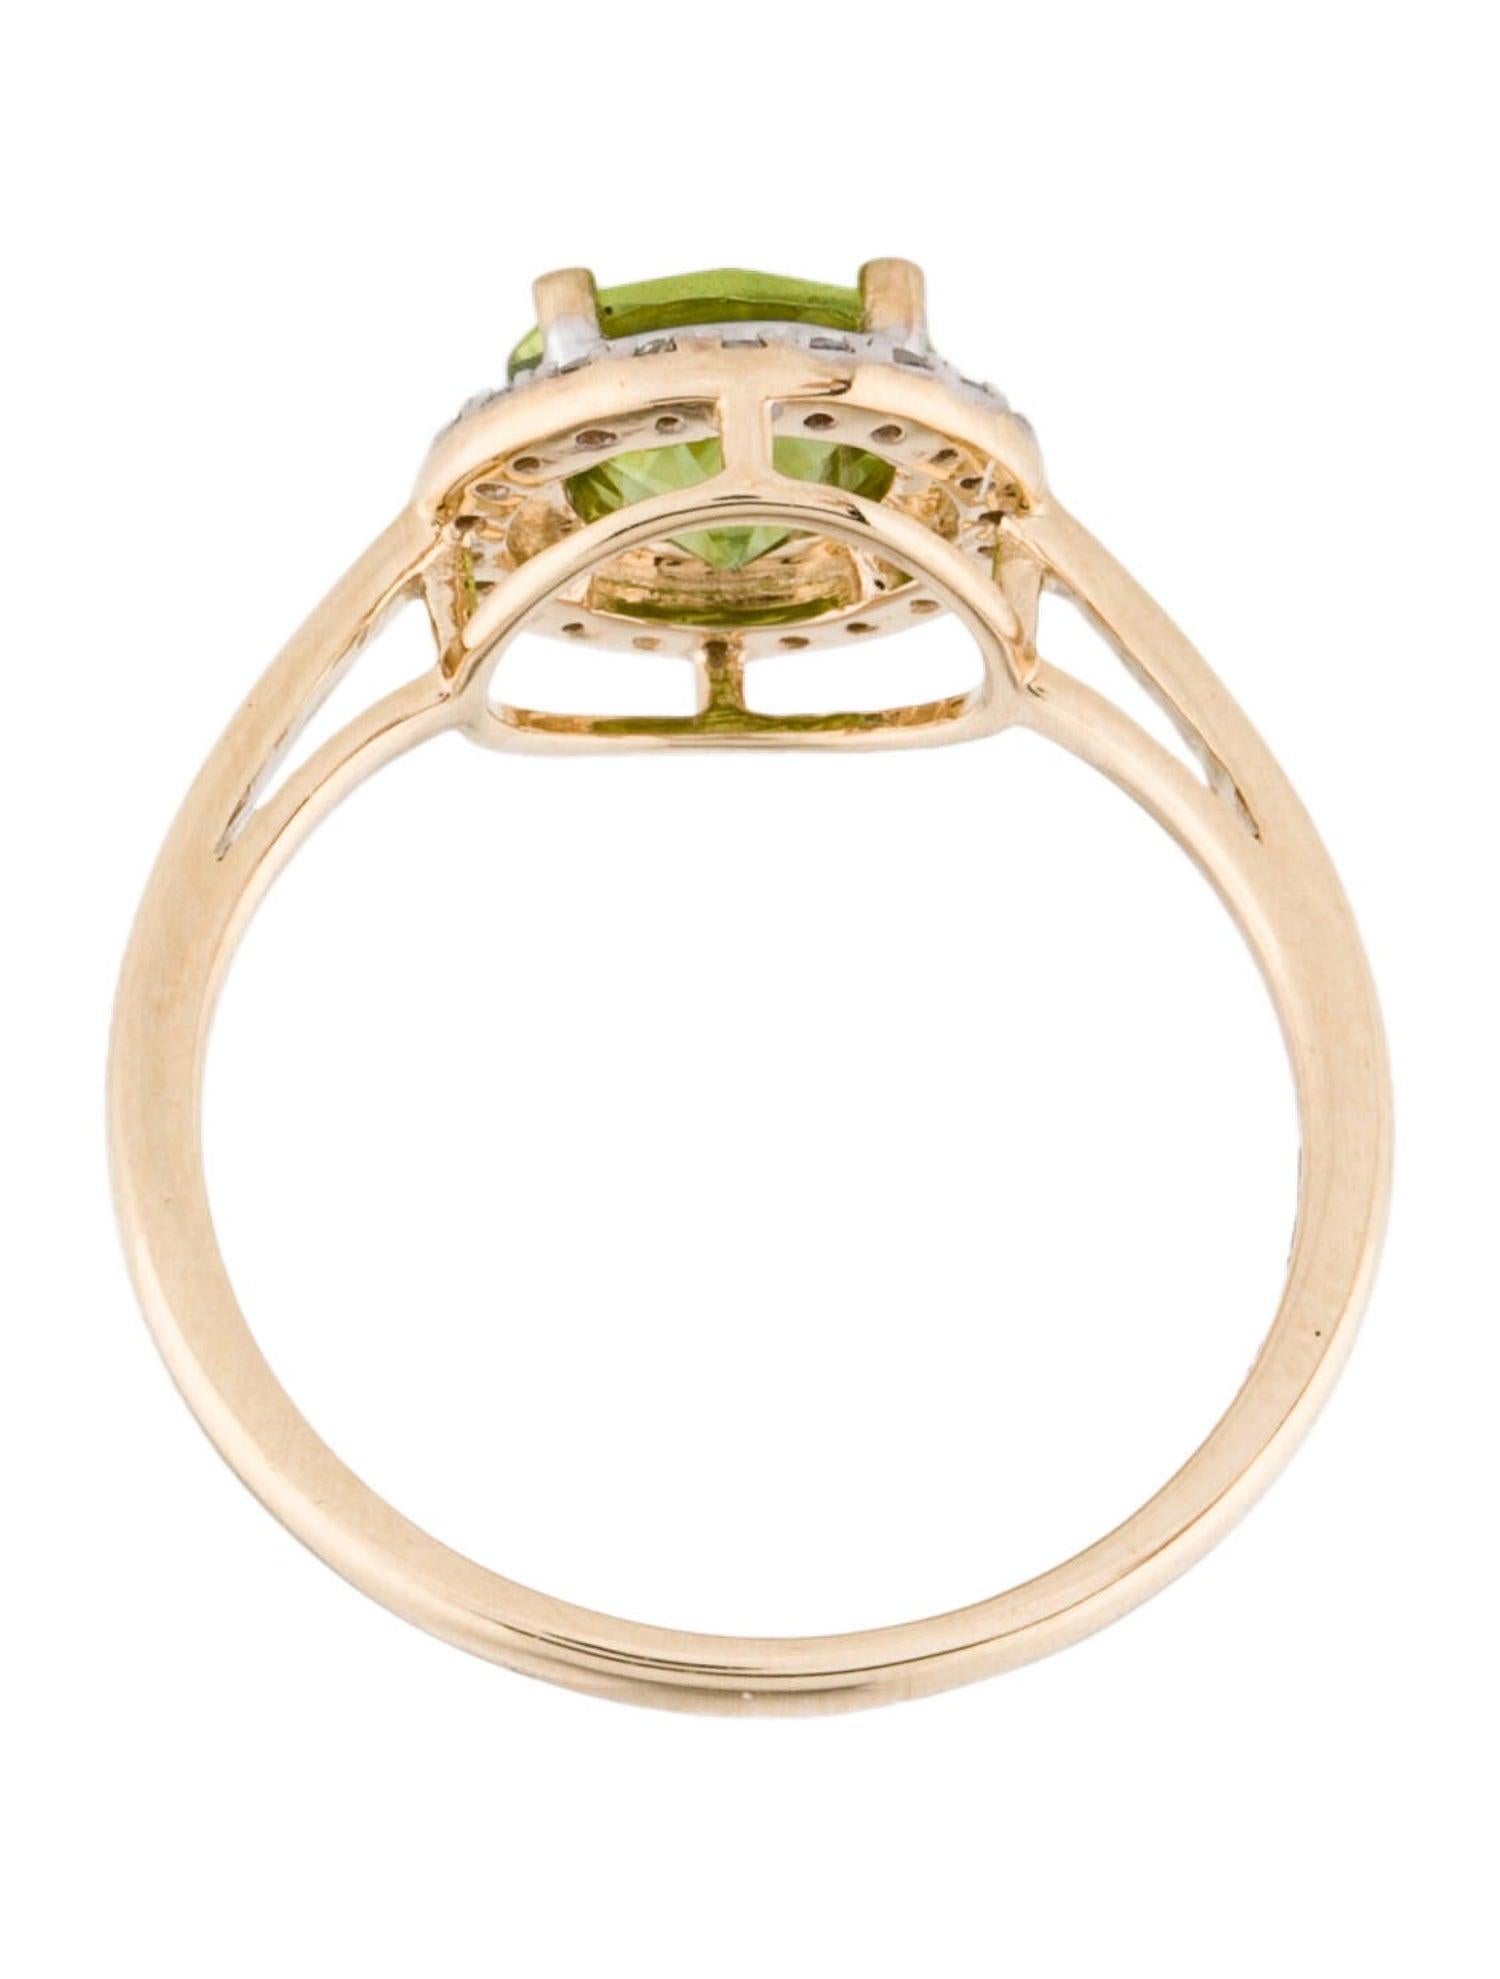 Stunning 14K Peridot & Diamond Cocktail Ring 1.32ctw - Size 6.75 - Elegant In New Condition For Sale In Holtsville, NY